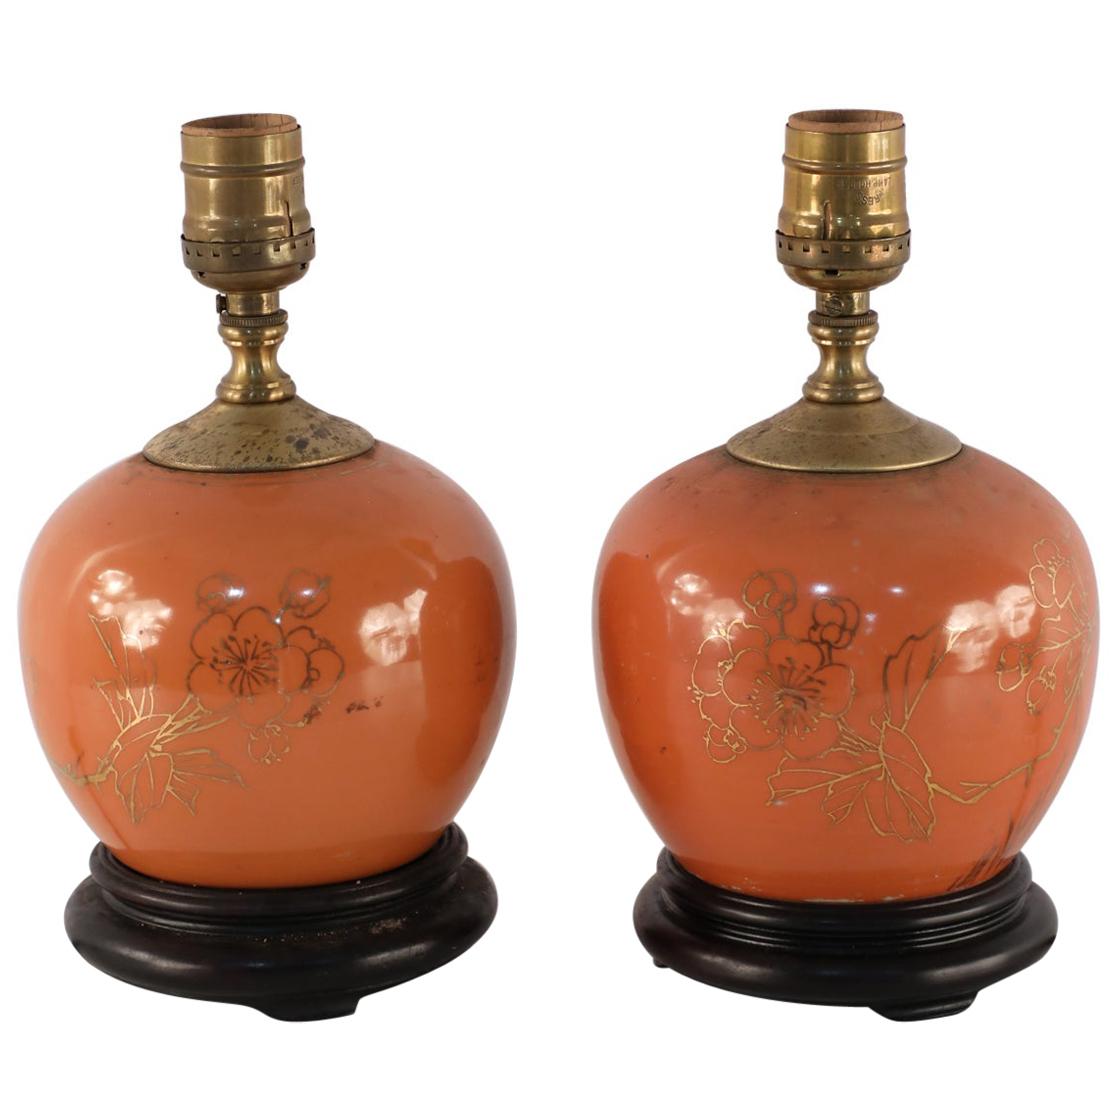 Pair of Antique Chinese Orange and Gold Floral Round Porcelain Table Lamps